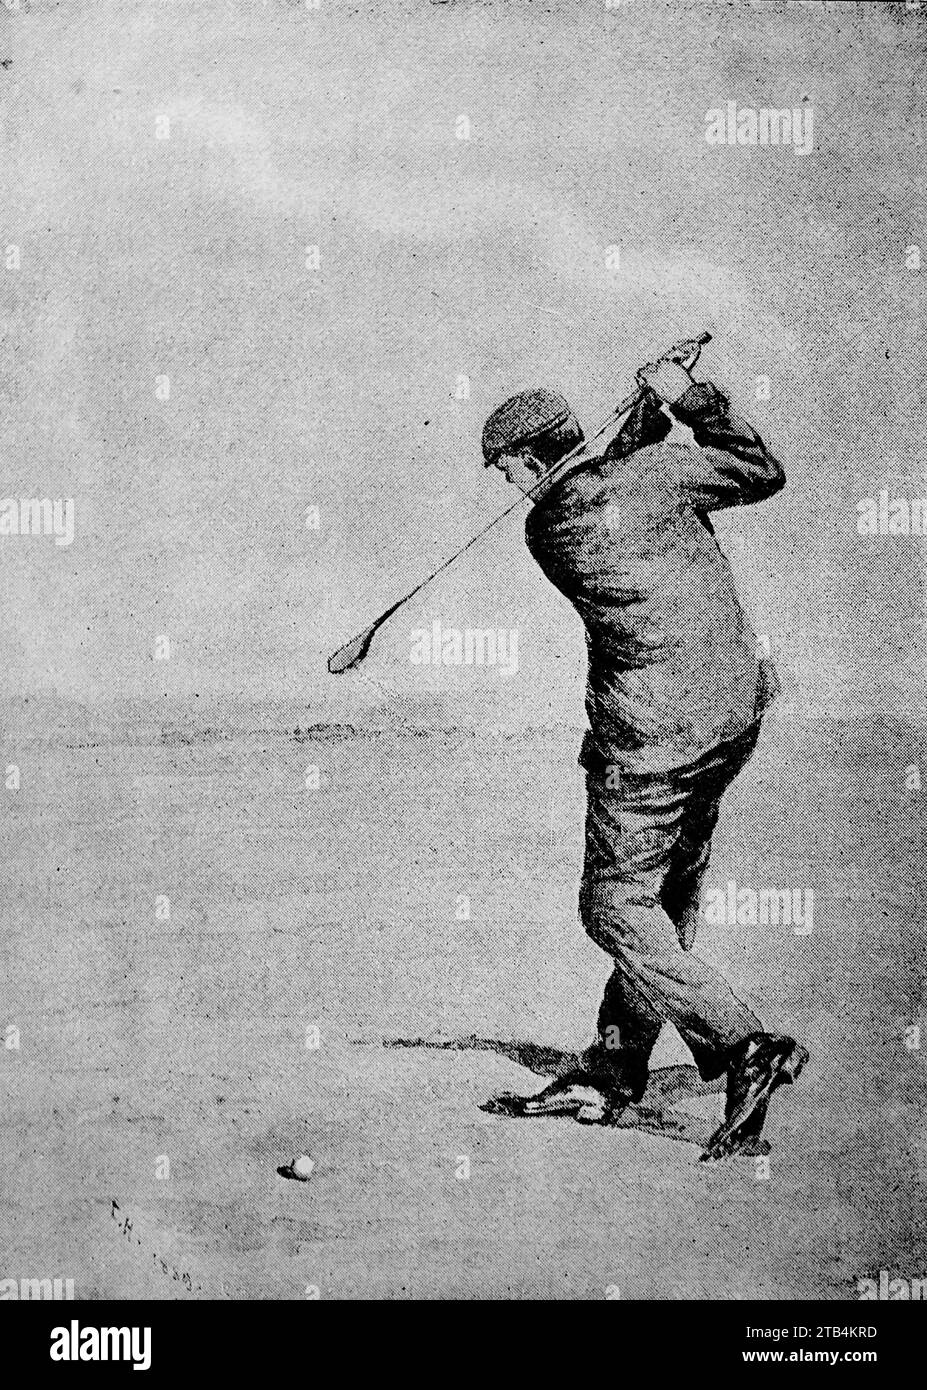 The St Andrews Swing.  From an illustration about golf, dating from 1889 to 1901. The history of golf is a long one. Though its origins are disputed, historians are generally agreed that what is known as “modern” golf began in the Middle Ages in Scotland. It was not until the mid to late nineteenth century that this sport became more popular in wider Britain, the British Empire and then the United States. Over the years the humble golf ball and golf club have changed vastly. Stock Photo